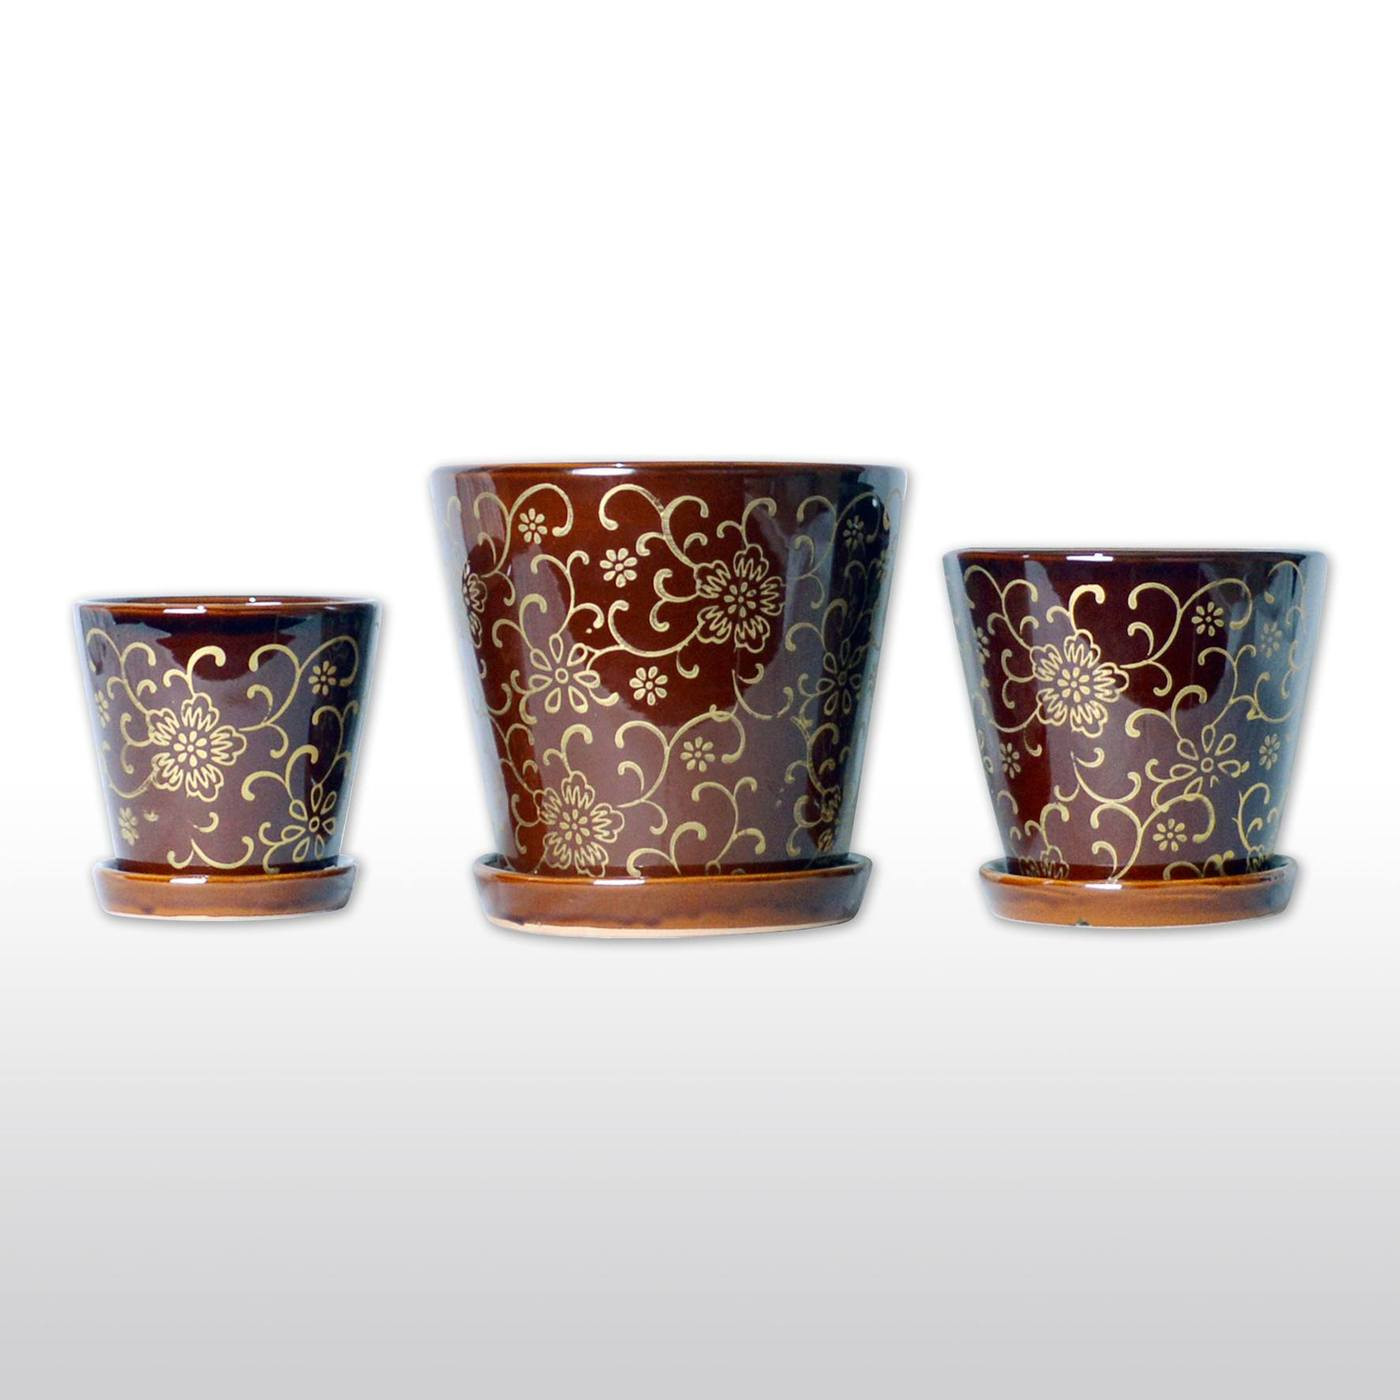 24 Popular Small Gold Flower Vases 2024 free download small gold flower vases of a trio of ceramic planters with trays floral motif three pots within ceramic planters ceramic flower pots with bottom trays with golden designs in burgundy set of